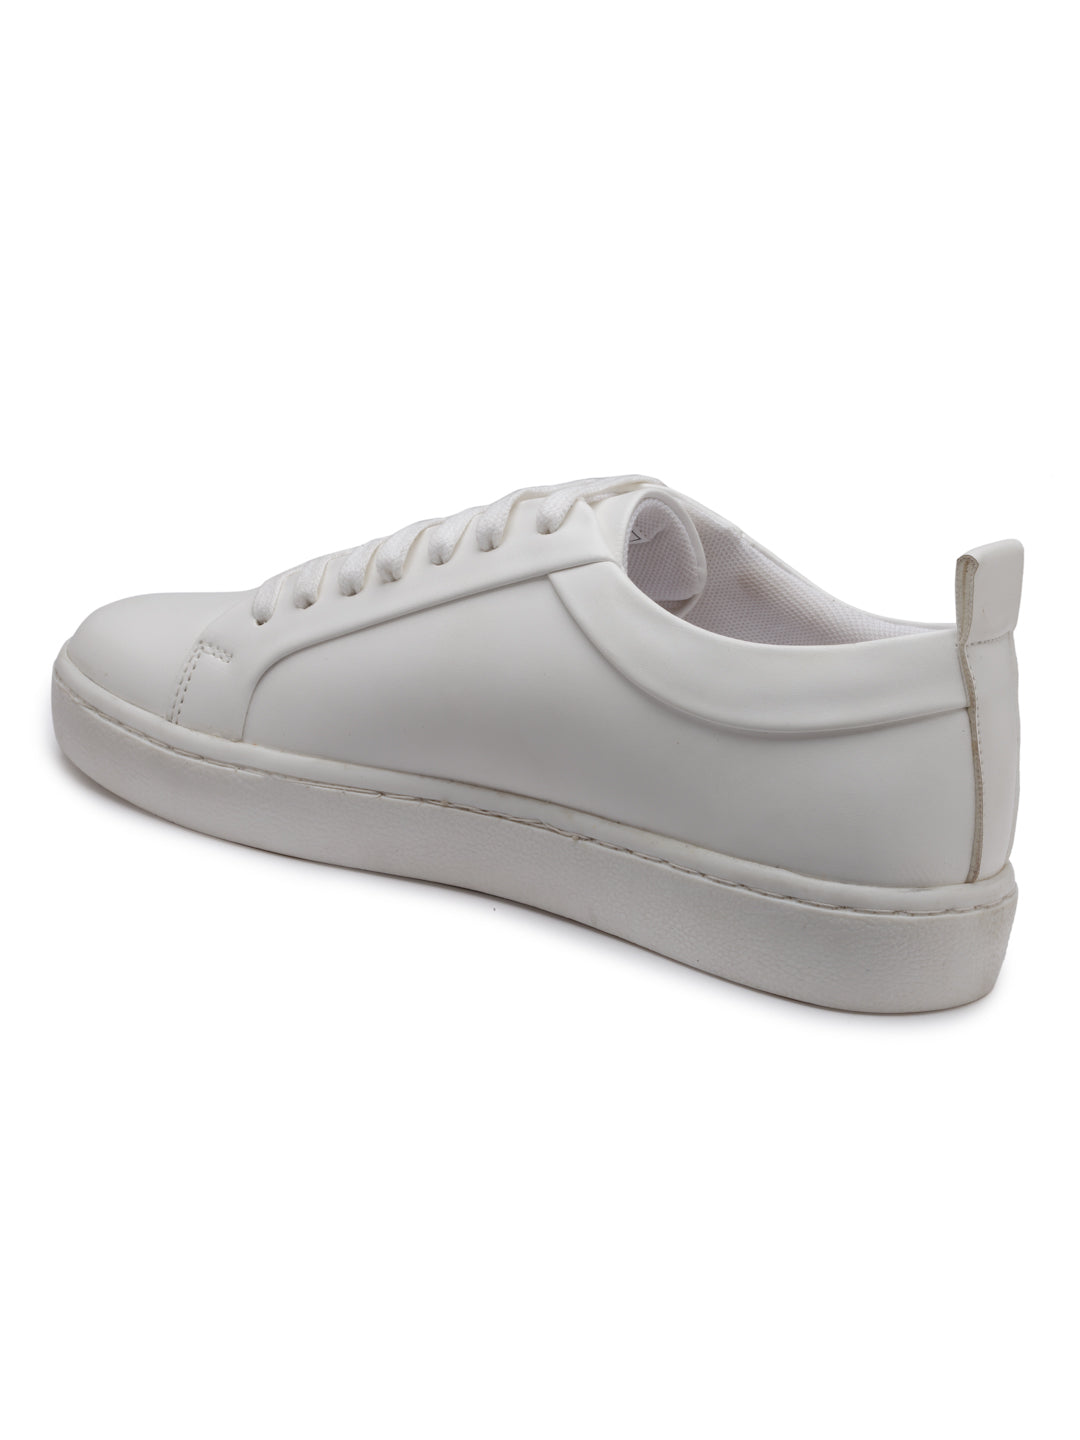 Women's White Synthetic Leather Lace up Casual Sneaker